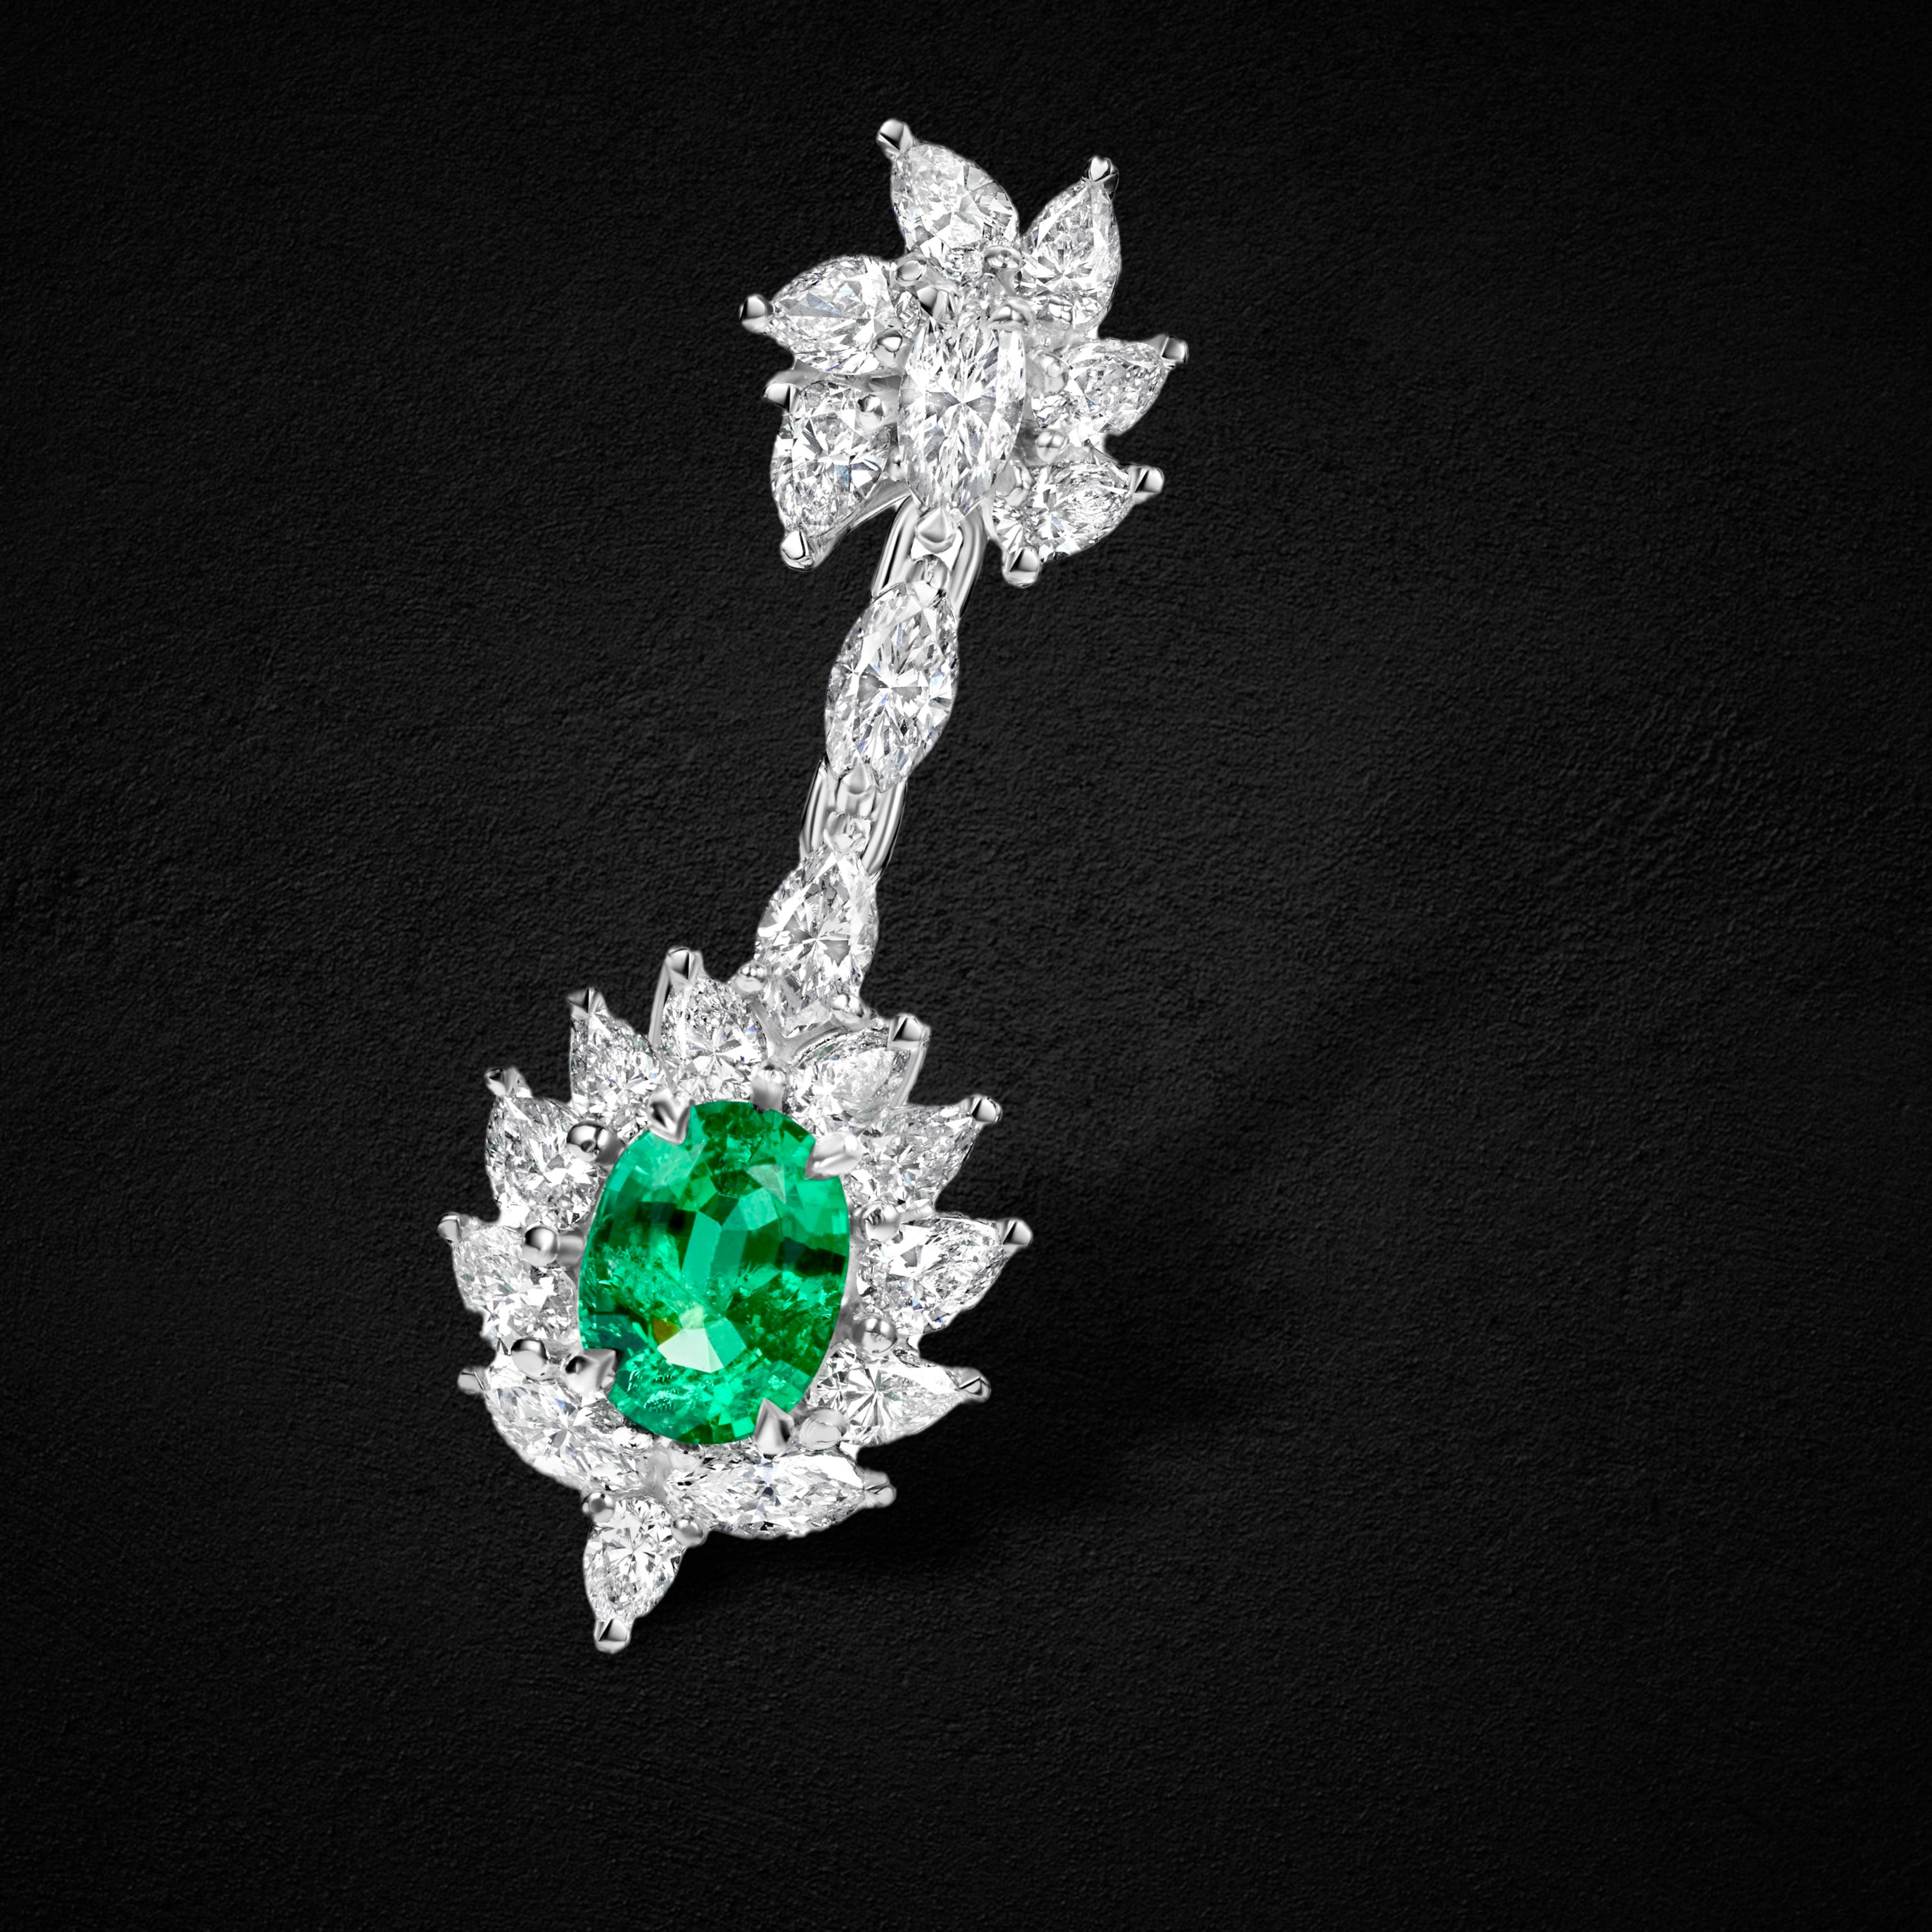 18kt White Gold Earrings With Marquise Diamonds and Colombian Emeralds 

Stunning Hand Crafted Colombian Emeralds  & Diamonds Earrings from Extremely high Quality !

Diamonds: Marquise cut diamonds, together 4.45ct

Emerald: Colombian Minor Oil 2